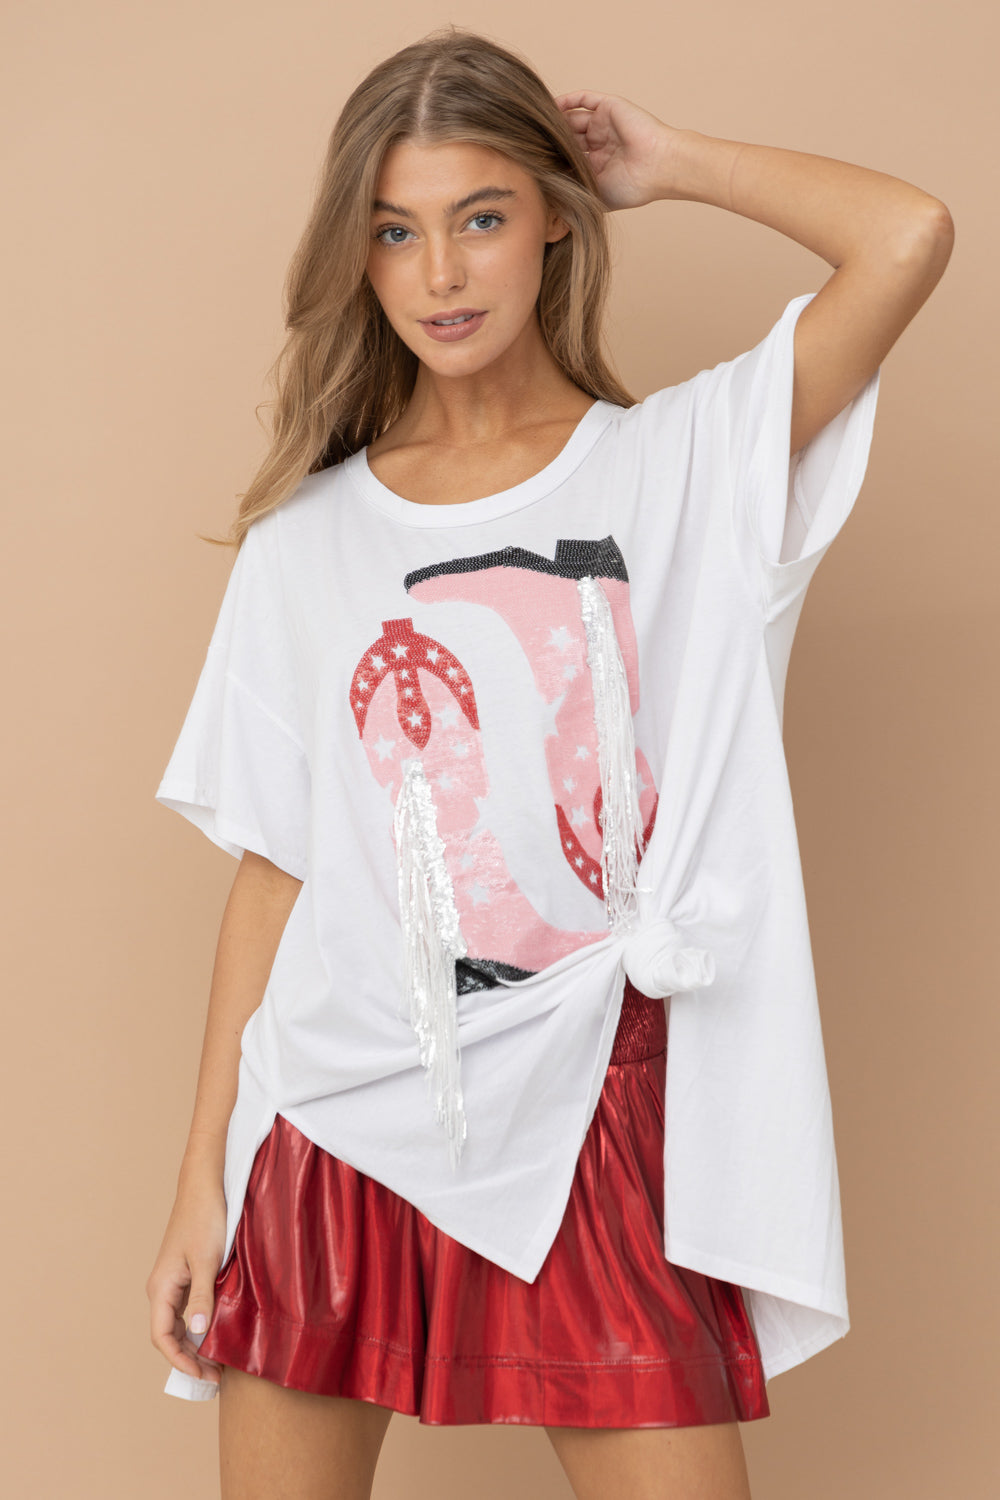 Boots Graphic Sequin Tee